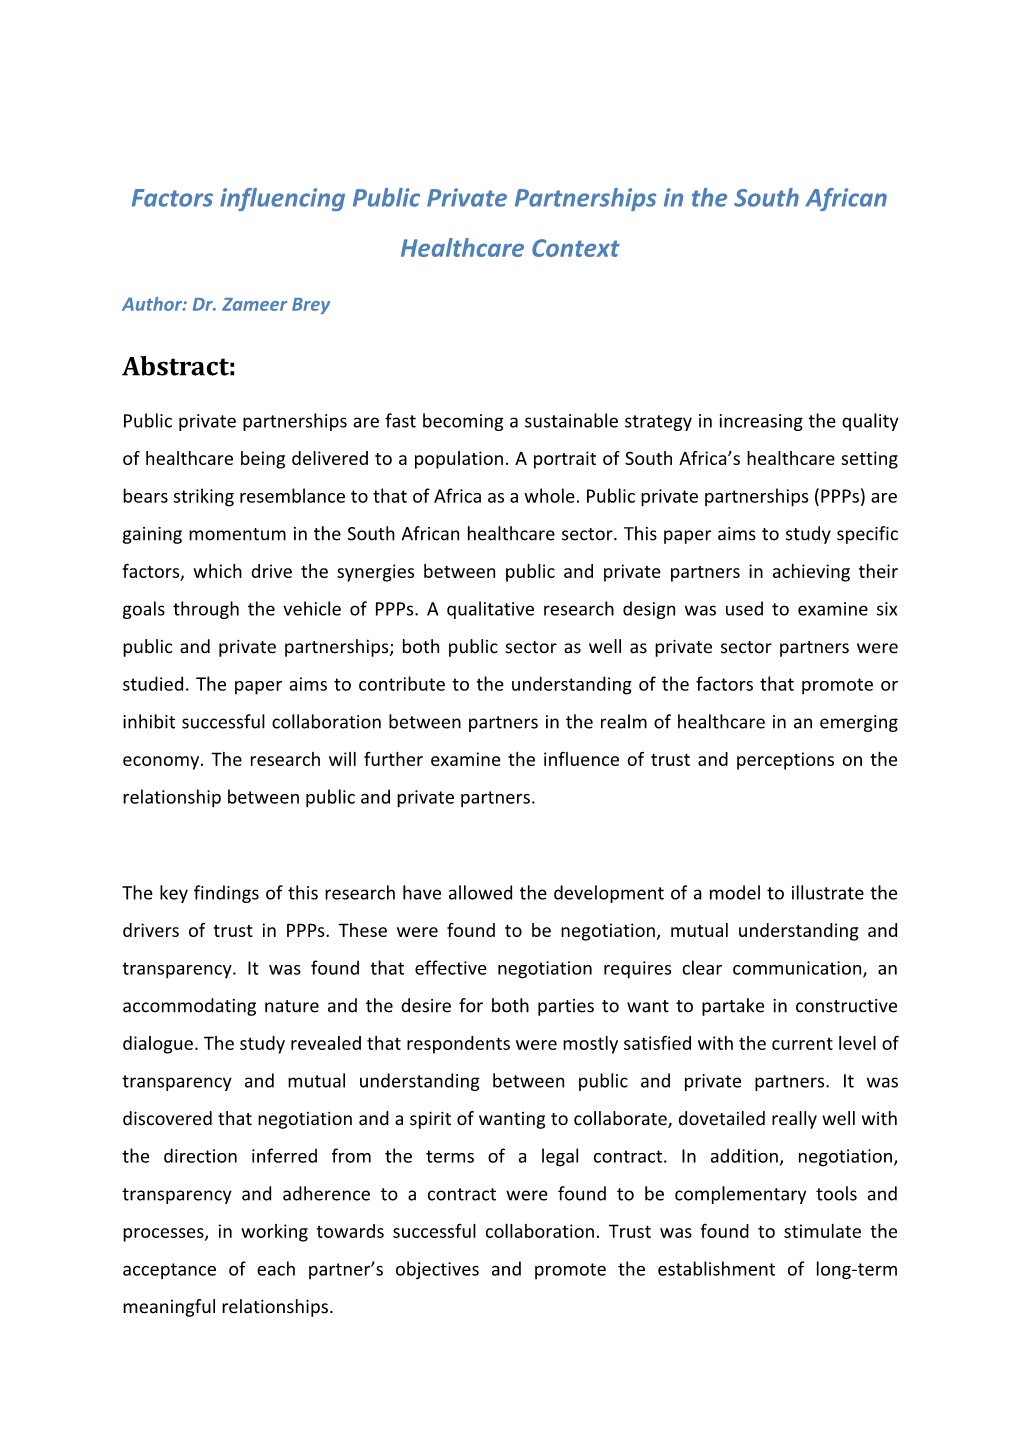 Factors Influencing Public Private Partnerships in the South African Healthcare Contex